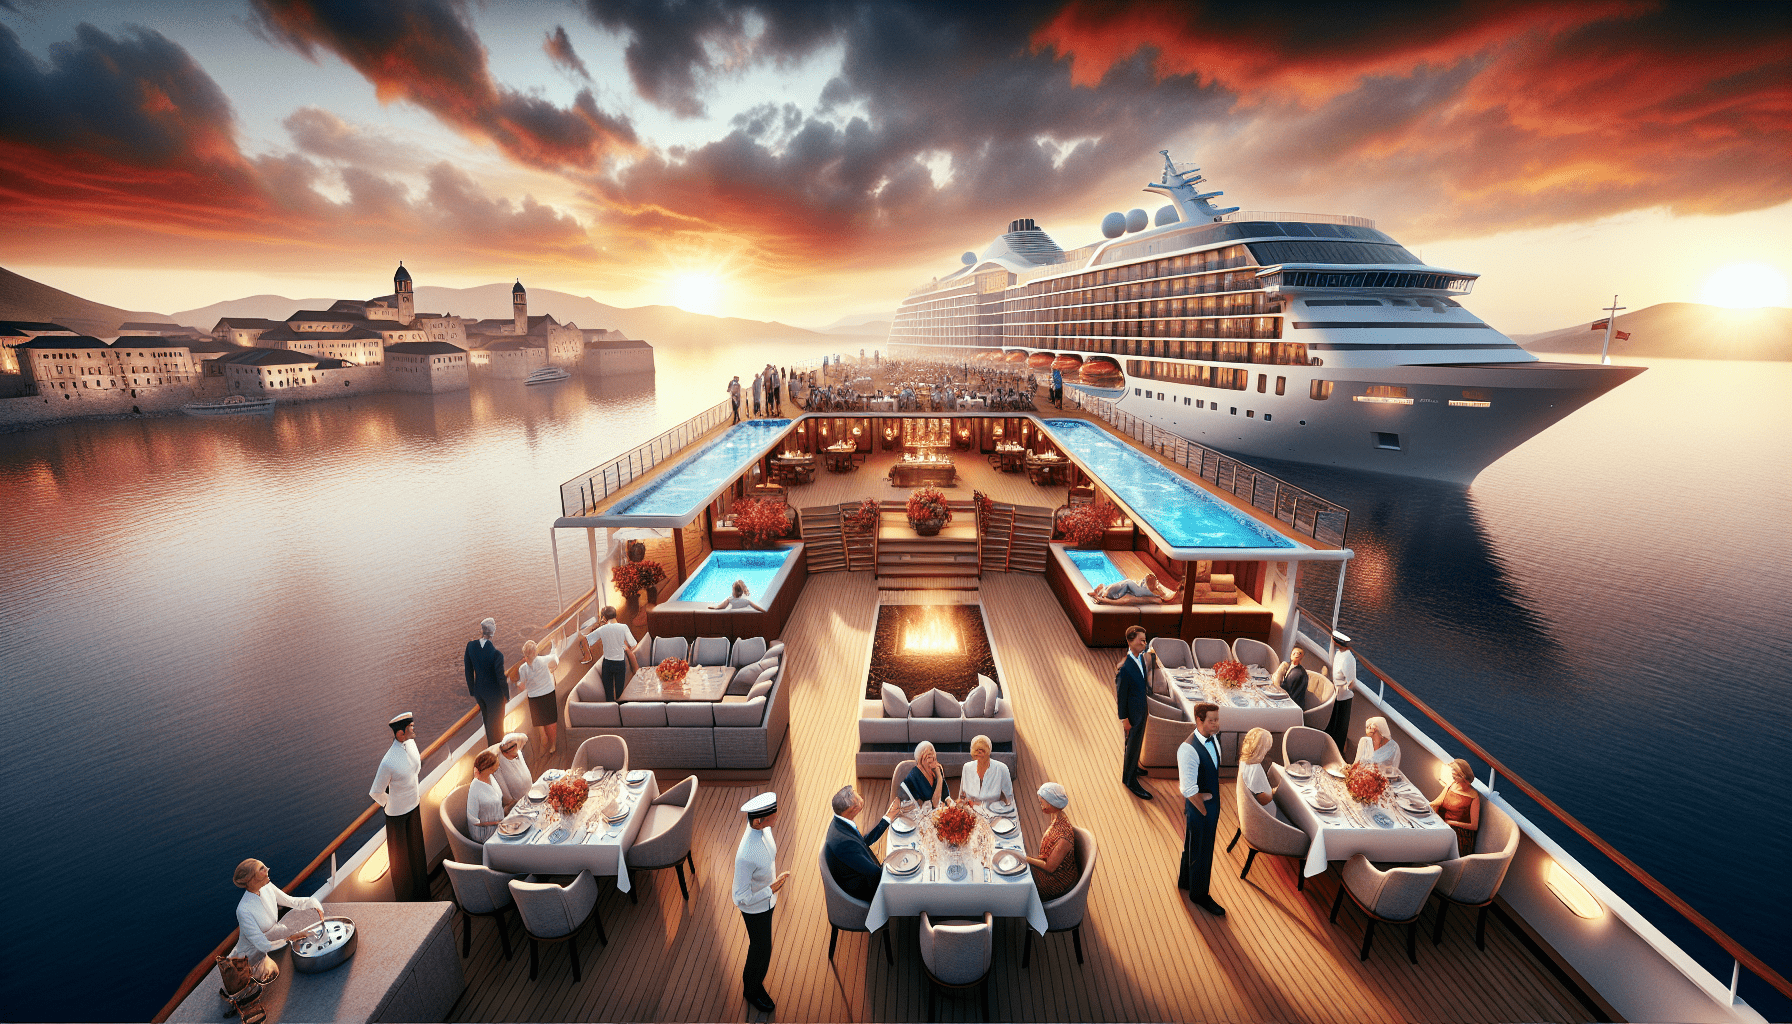 Why Is Viking Cruises So Expensive?